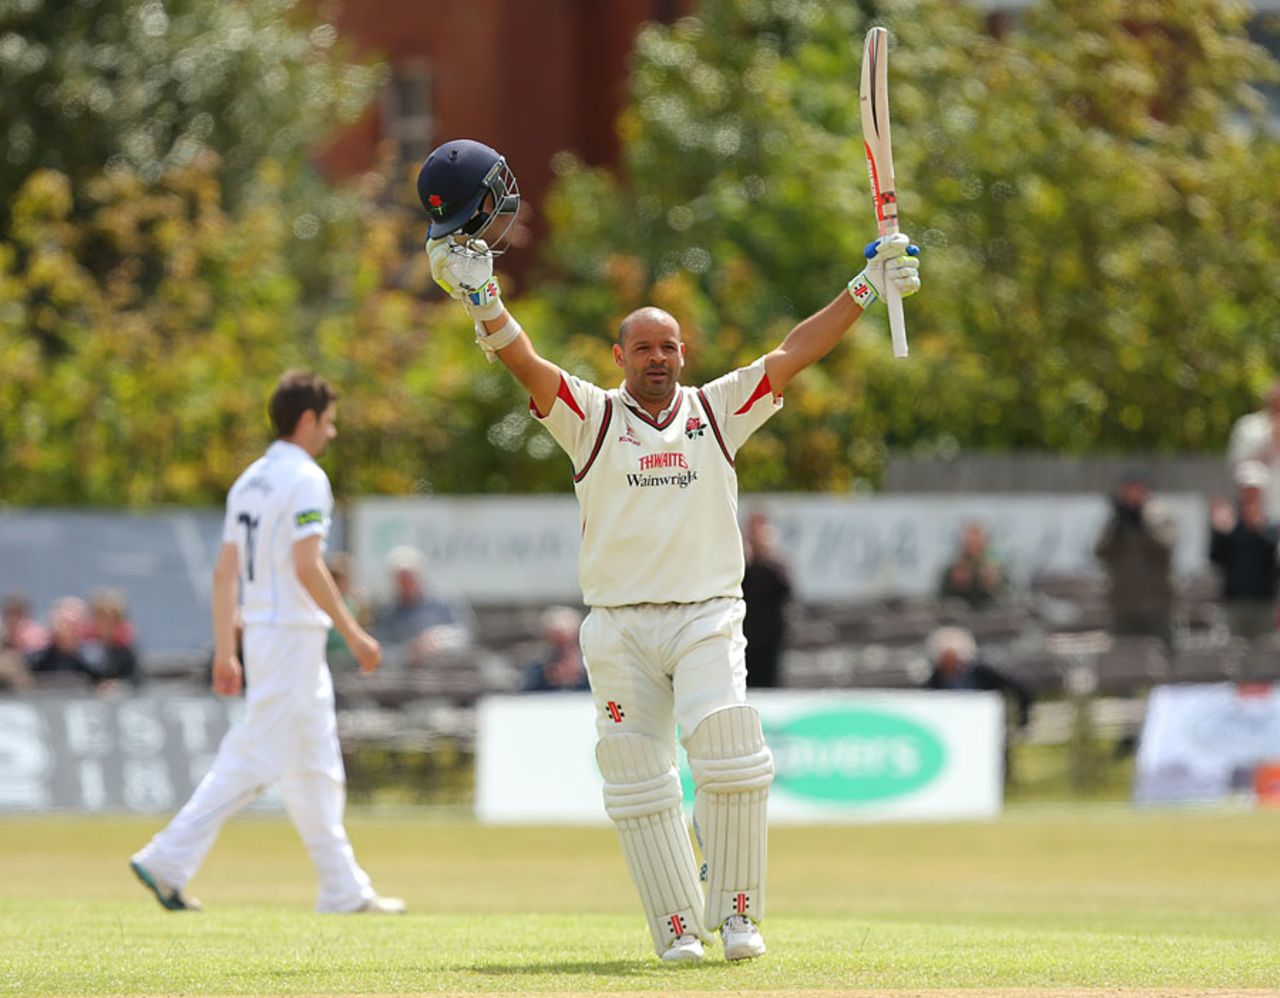 Ashwell Prince celebrates his double hundred, Lancashire v Derbyshire, County Championship, Division Two, Southport, 3rd day, May 26, 2015